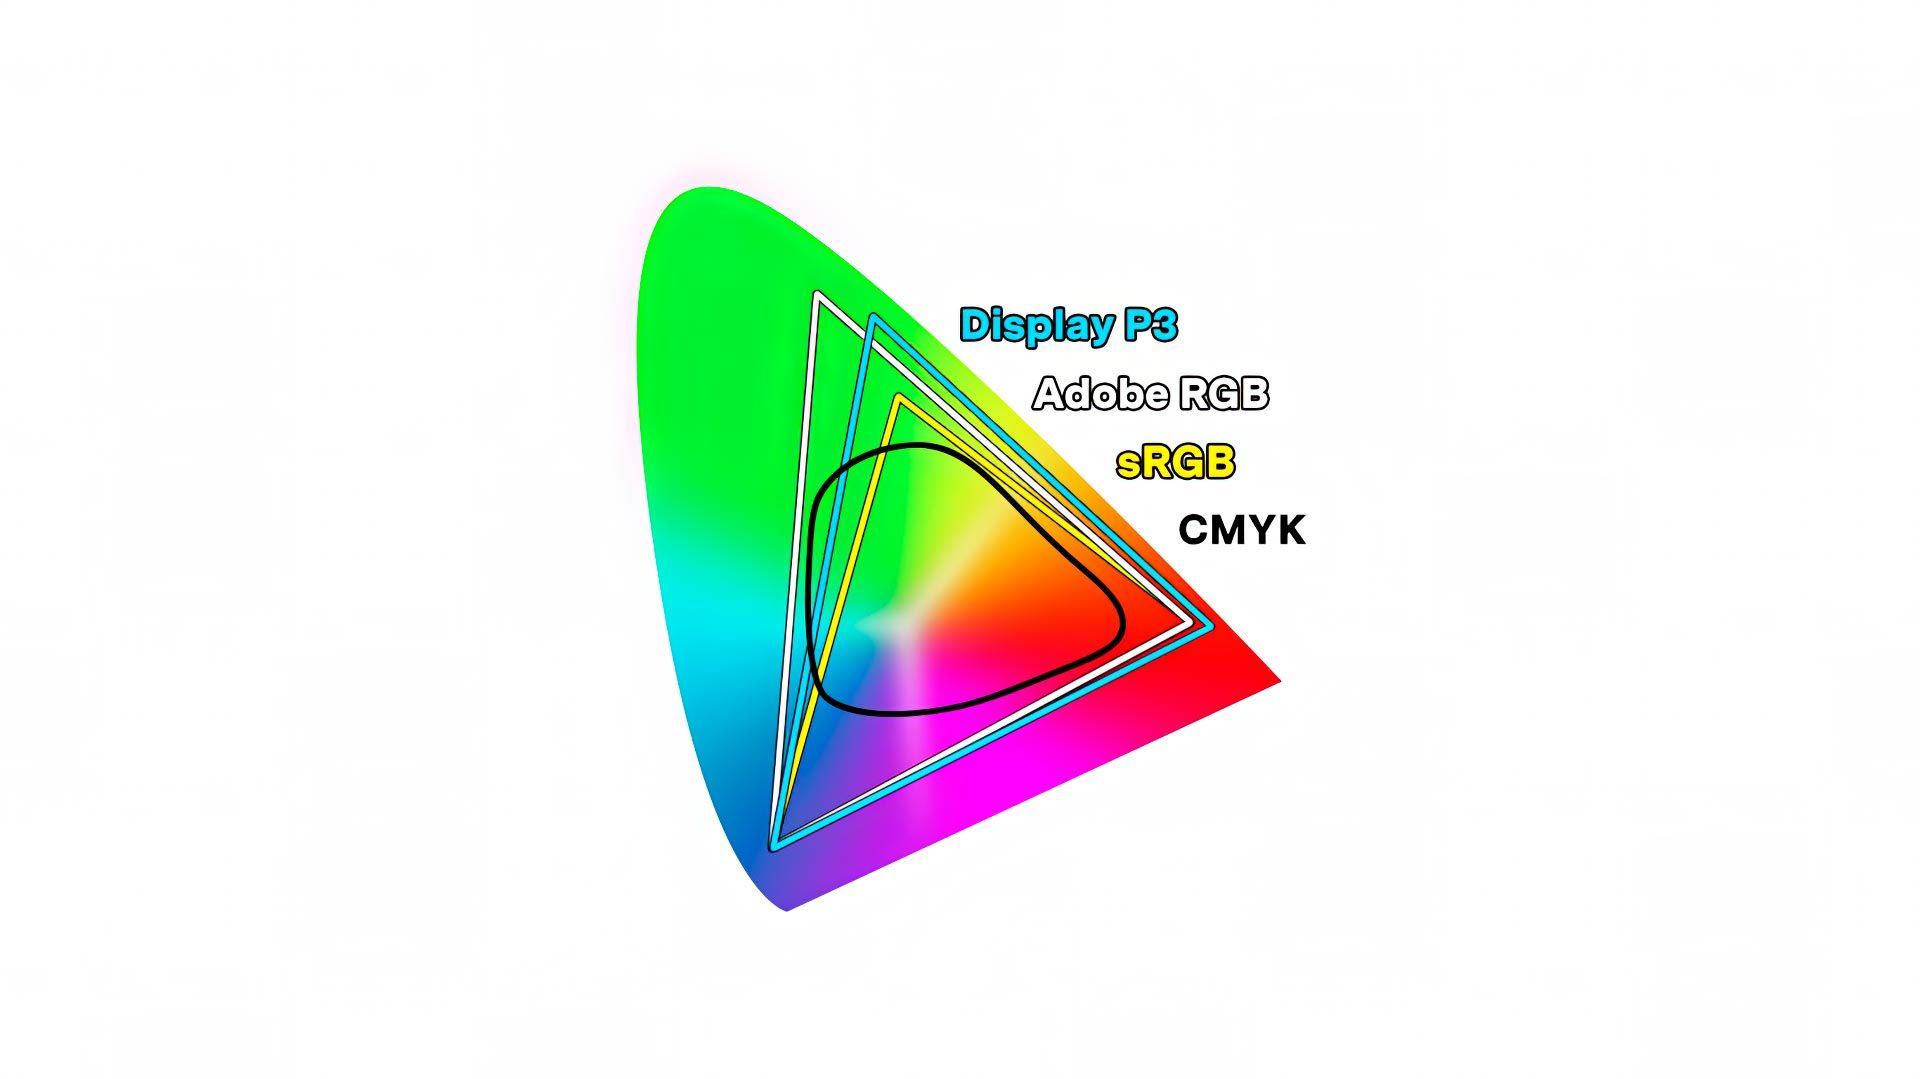 CIE chromaticity spectrum with sRGB, Adobe RGB, Display P3 and CMYK color gamuts